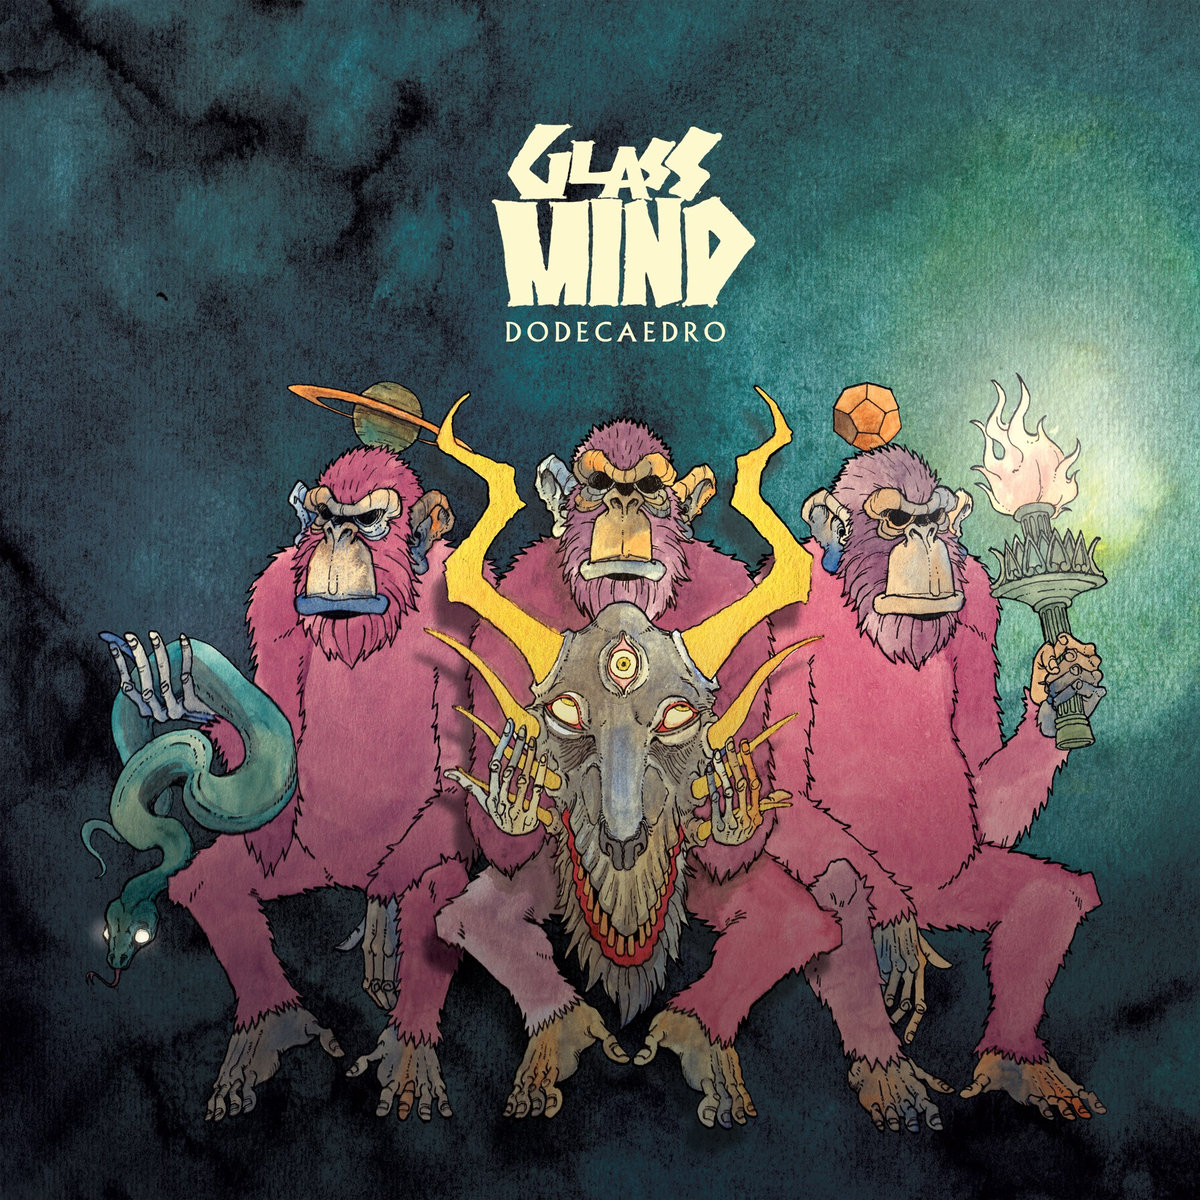 Glass Mind: Dodecaedro